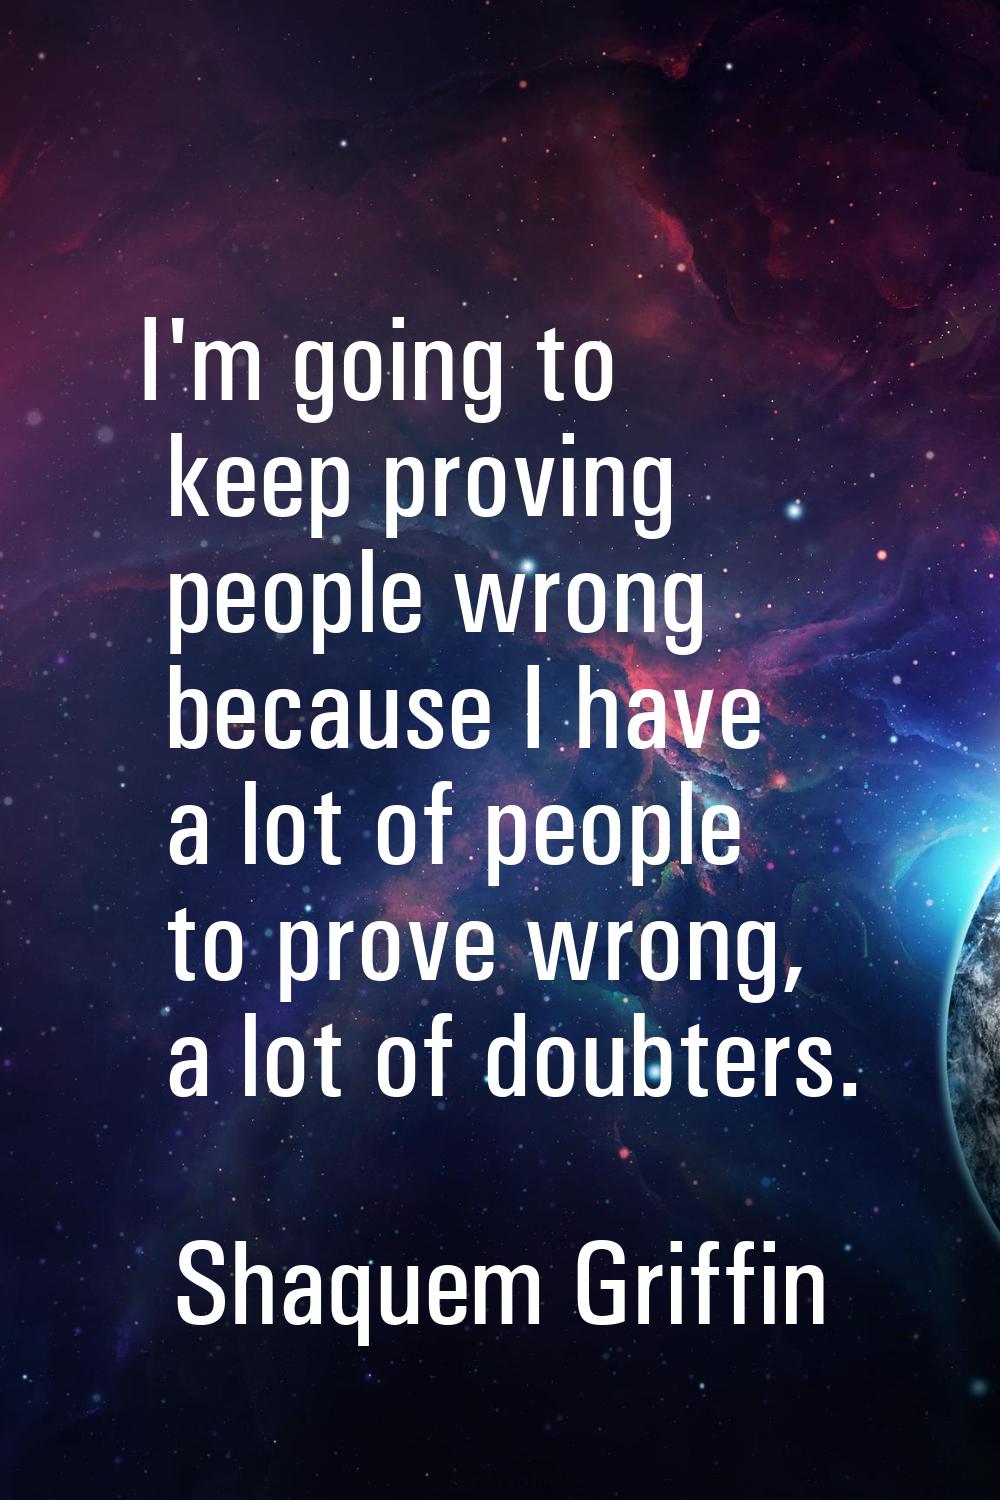 I'm going to keep proving people wrong because I have a lot of people to prove wrong, a lot of doub